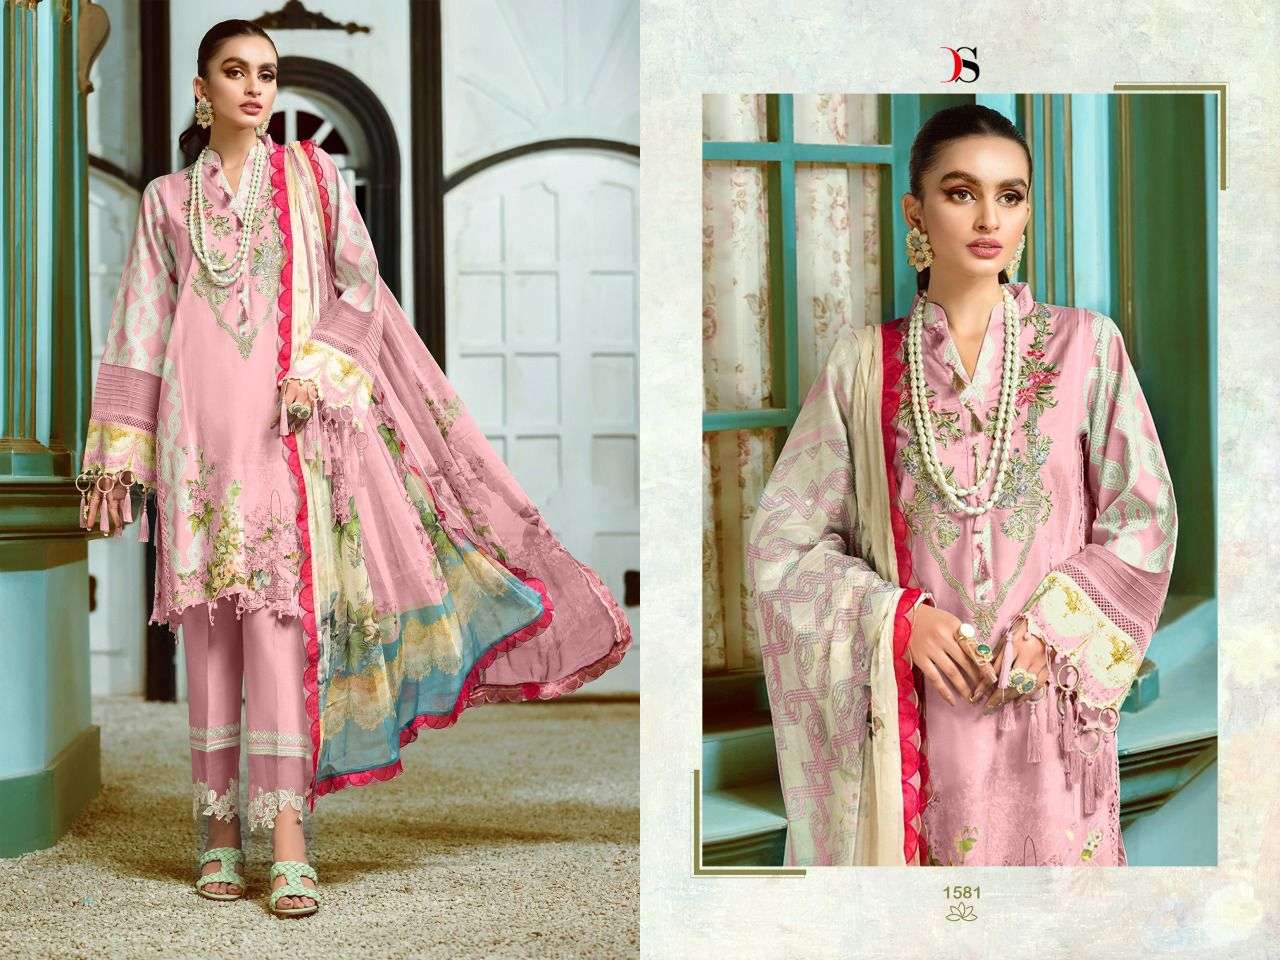 DEEPSY SUITS PRESENT BLISS LAWN 22-2 COTTON EMBROIDERY PAKISTANI SUITS IN WHOLESALE PRICE IN SURAT - SAI DRESSES